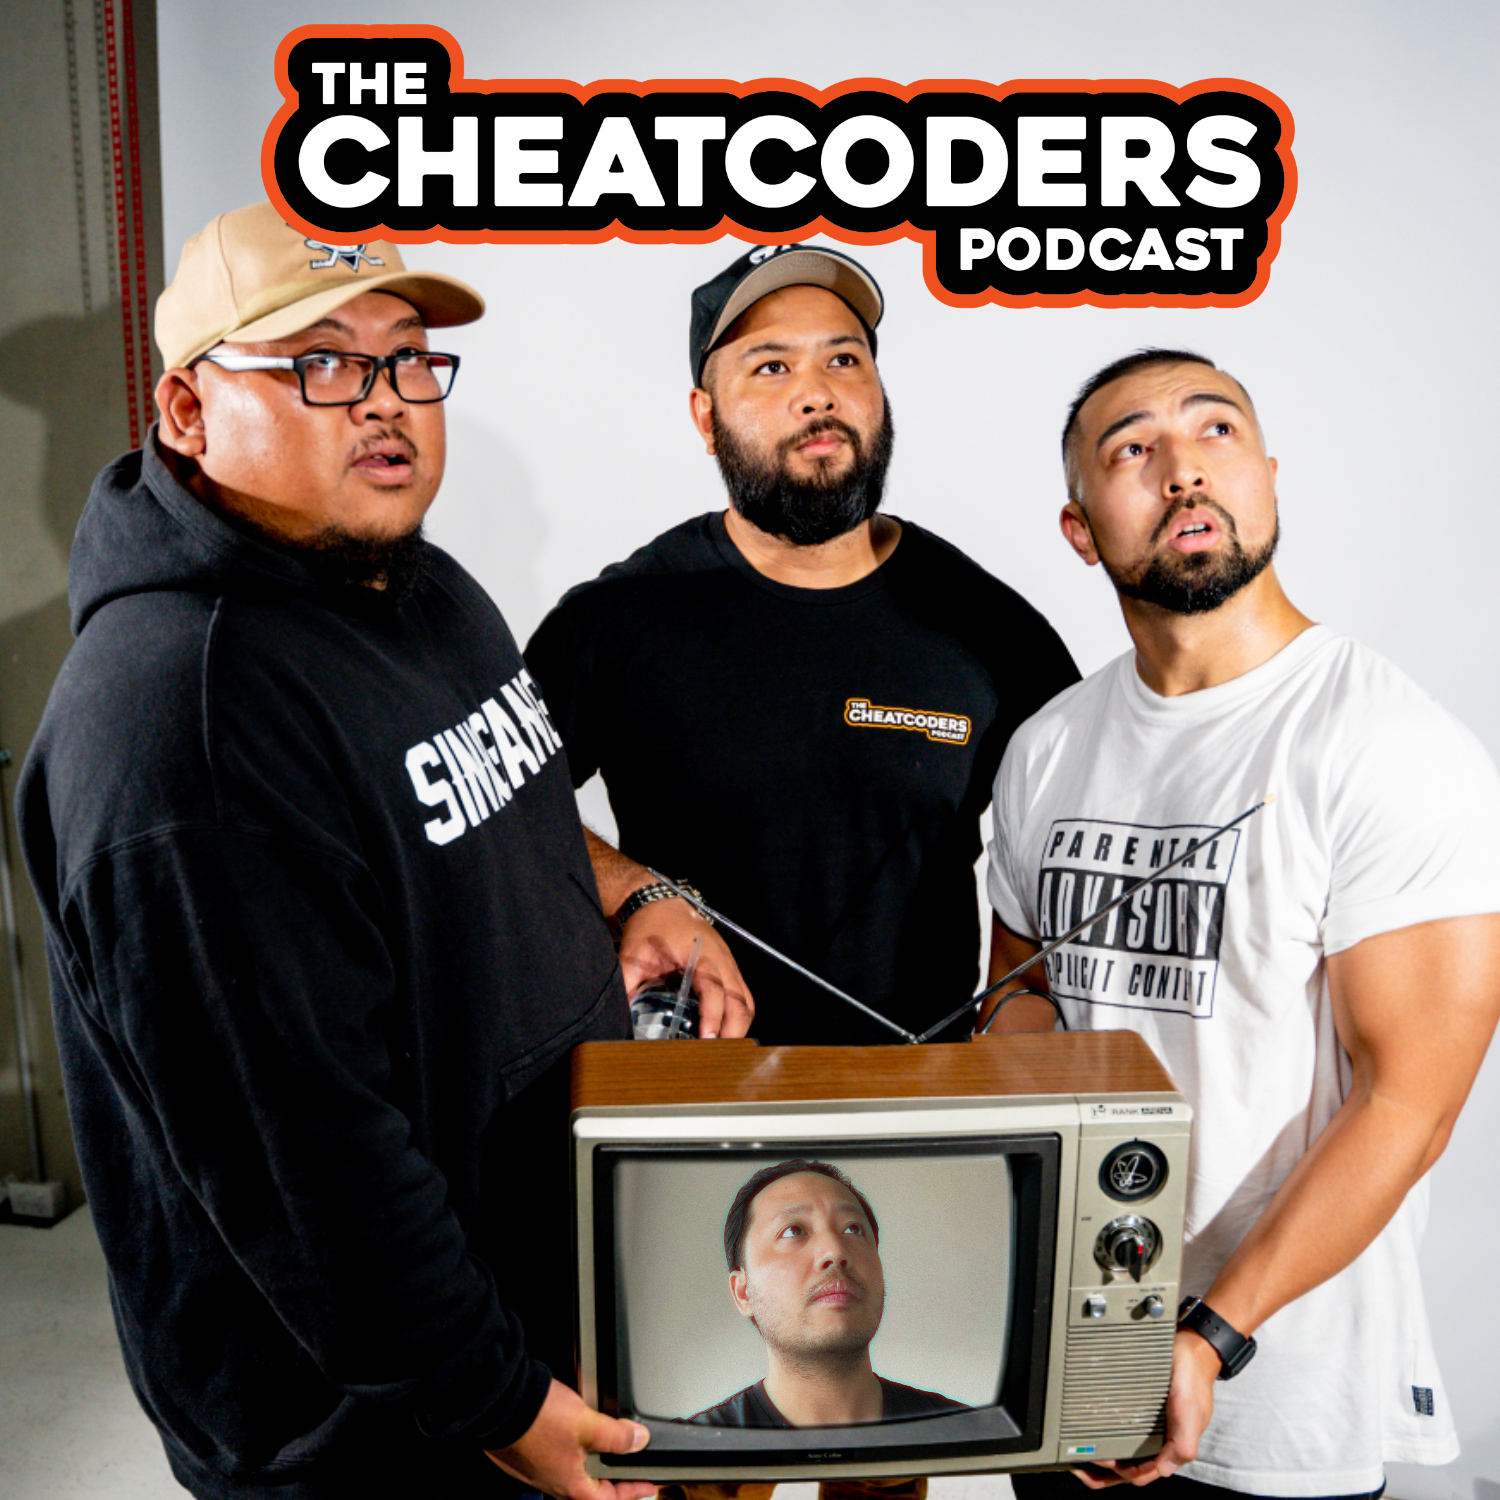 Artwork for podcast The Cheatcoders Podcast